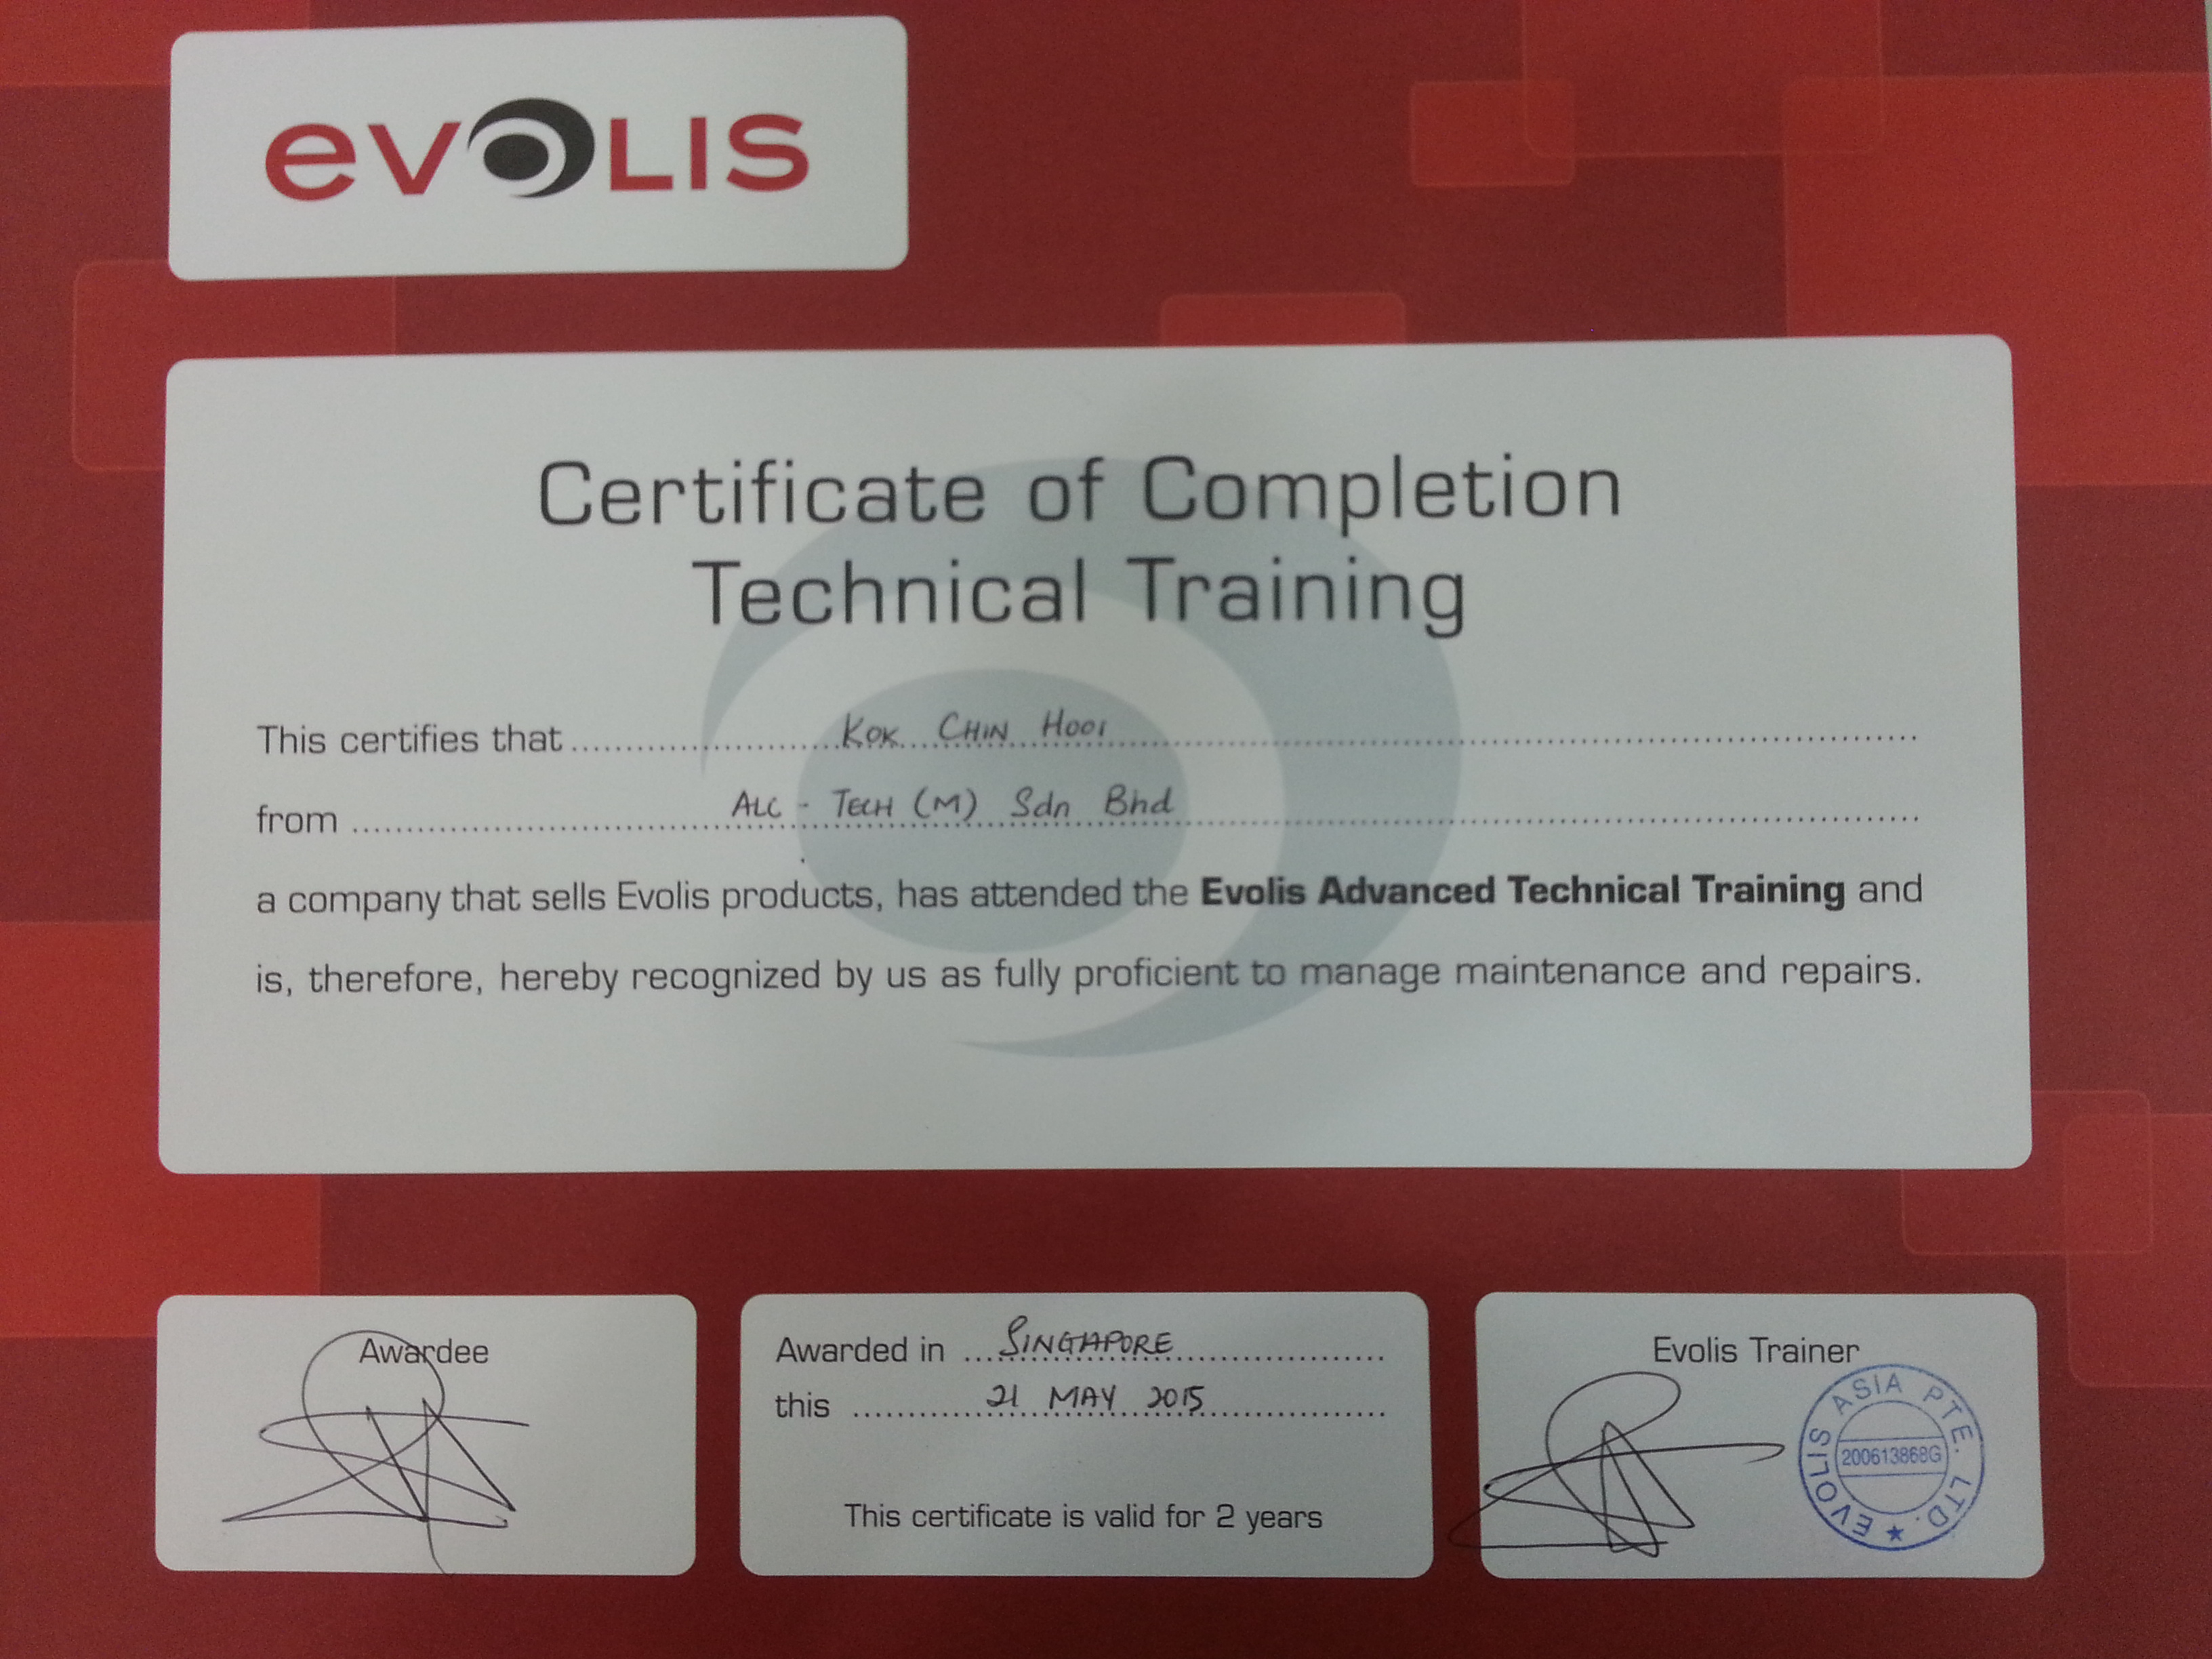 evolis certificate of completion technical training